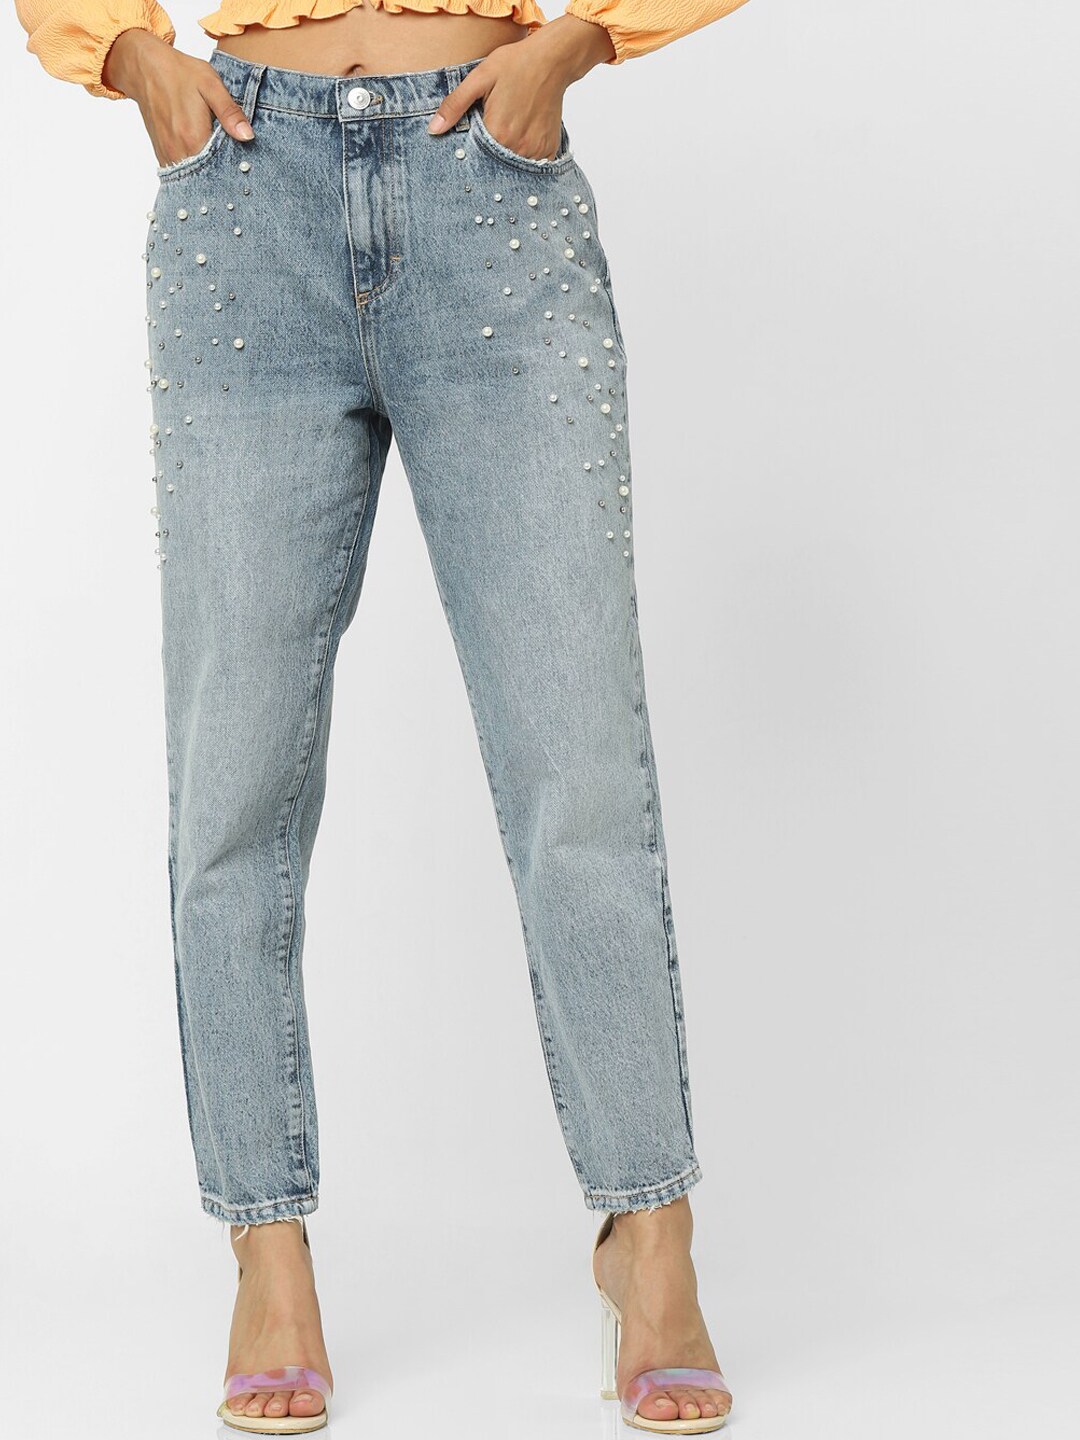 ONLY Women Blue High-Rise Jeans Price in India